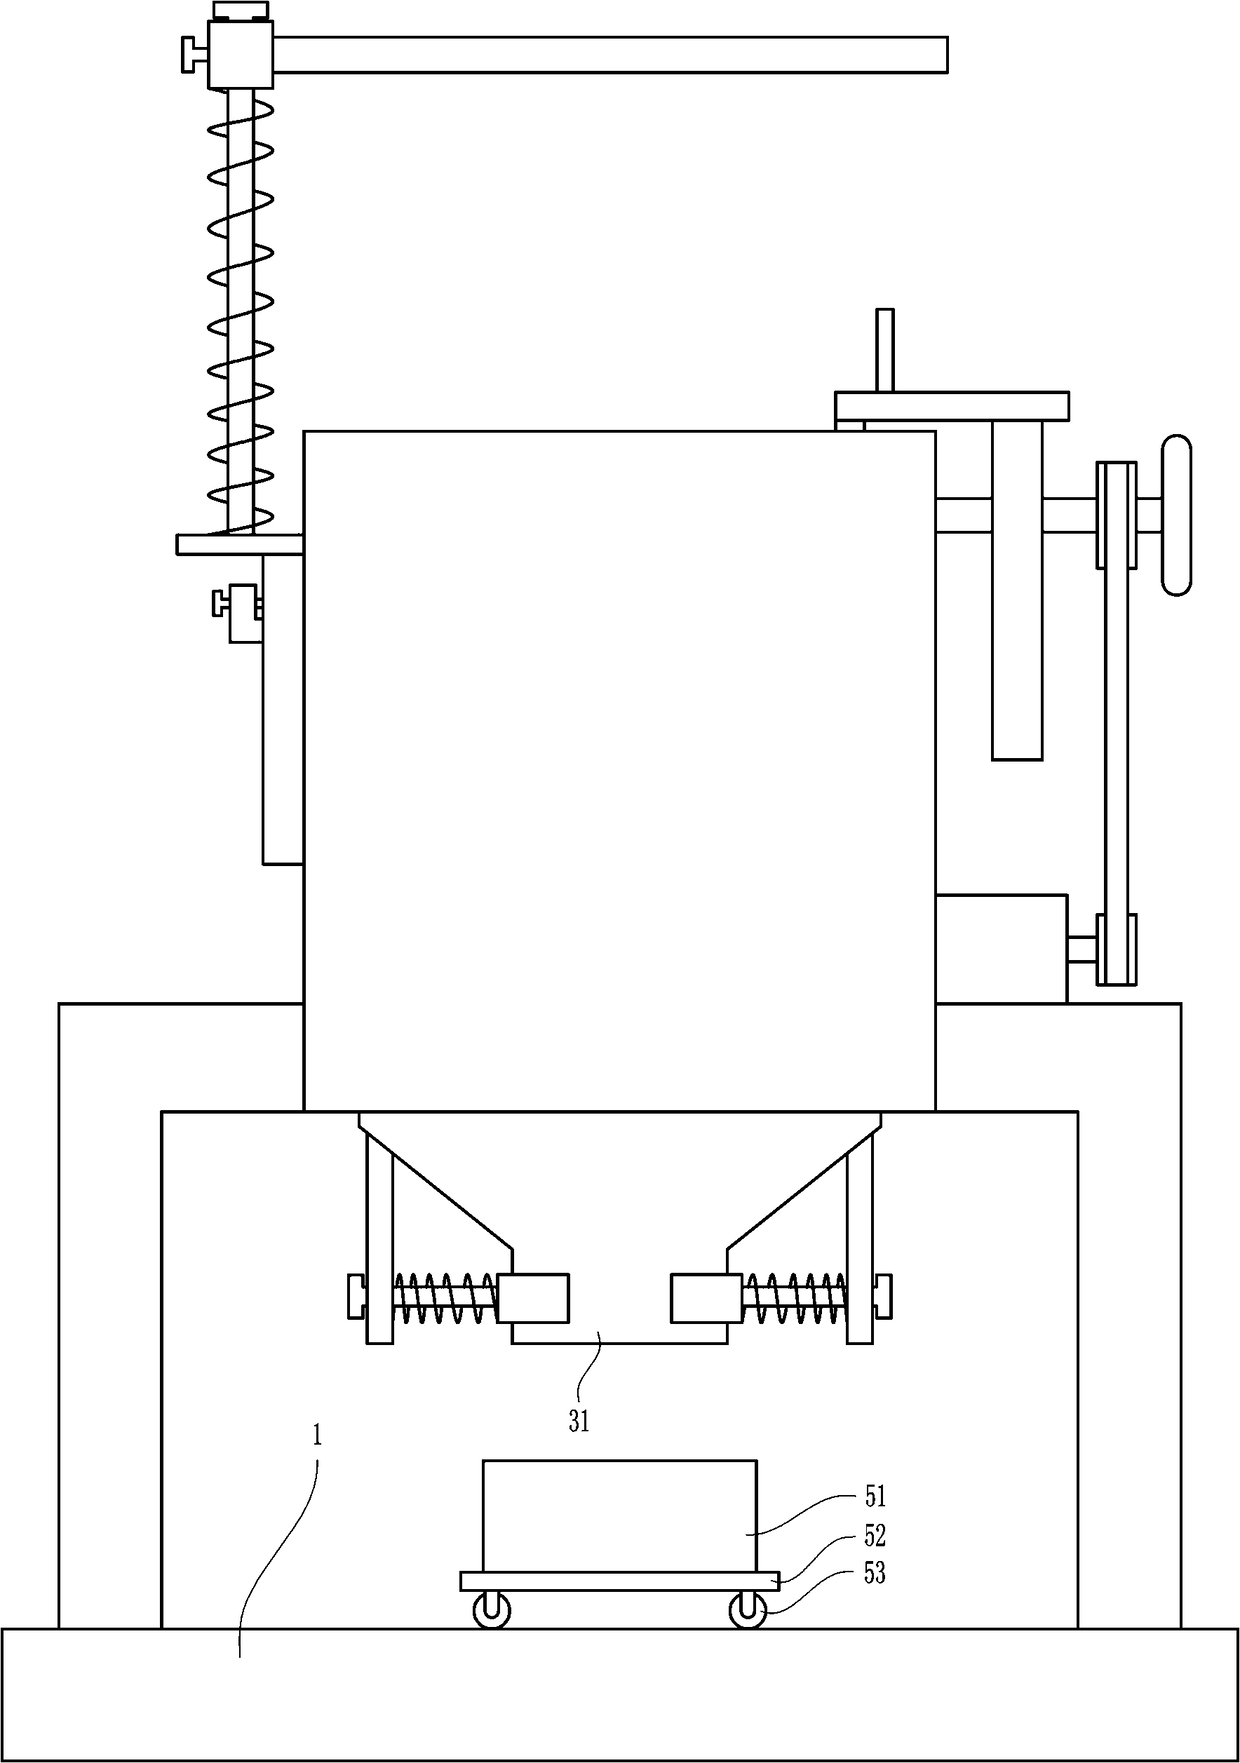 Wheat grain sieving device for agriculture